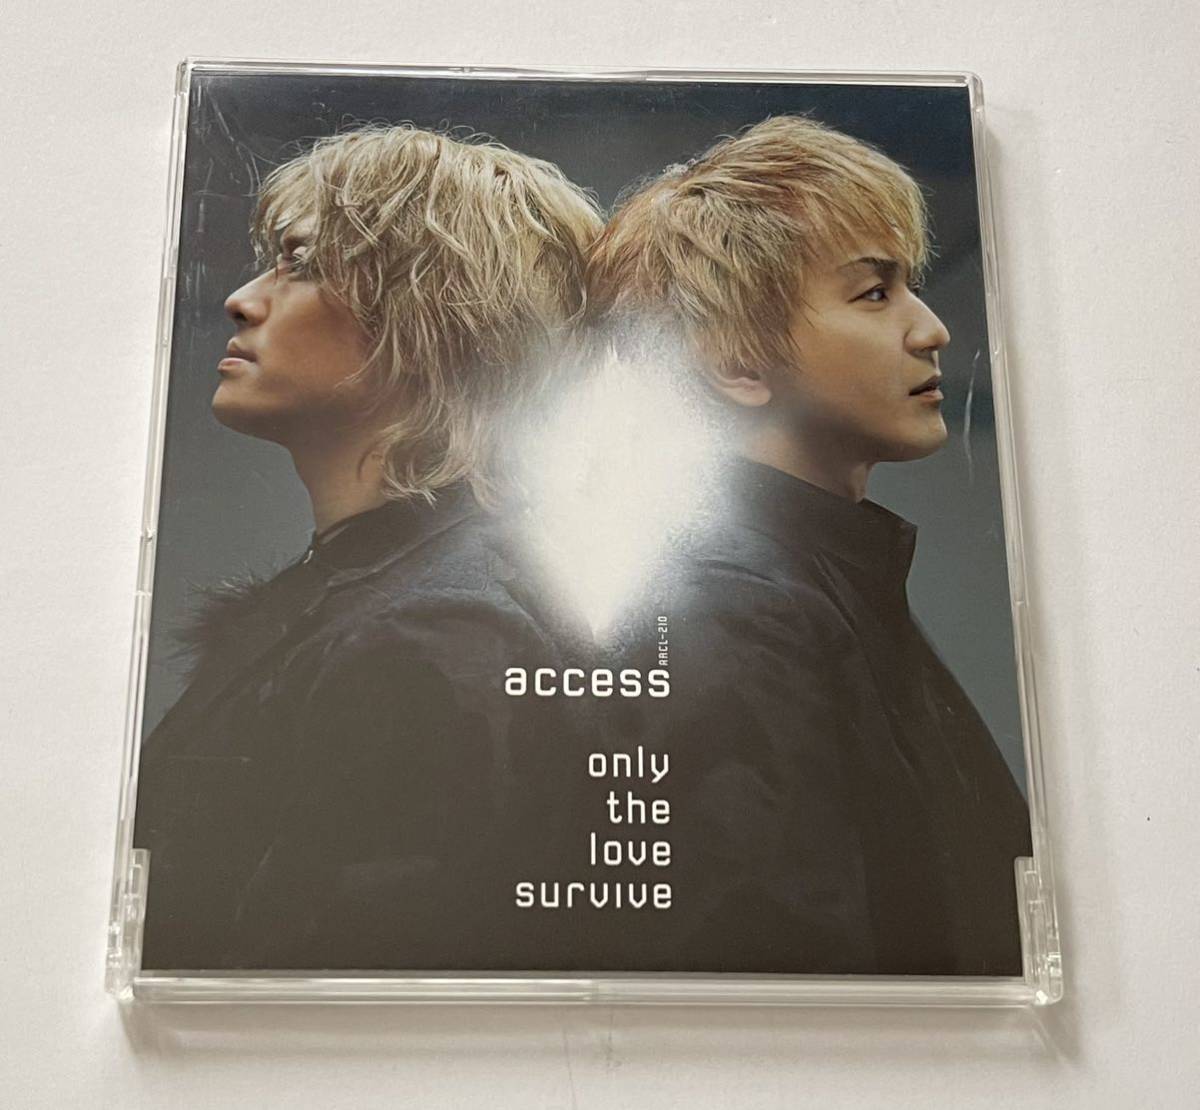 access 「only the love survive」CD シングル　浅倉大介　貴水博之　帯付き_画像1